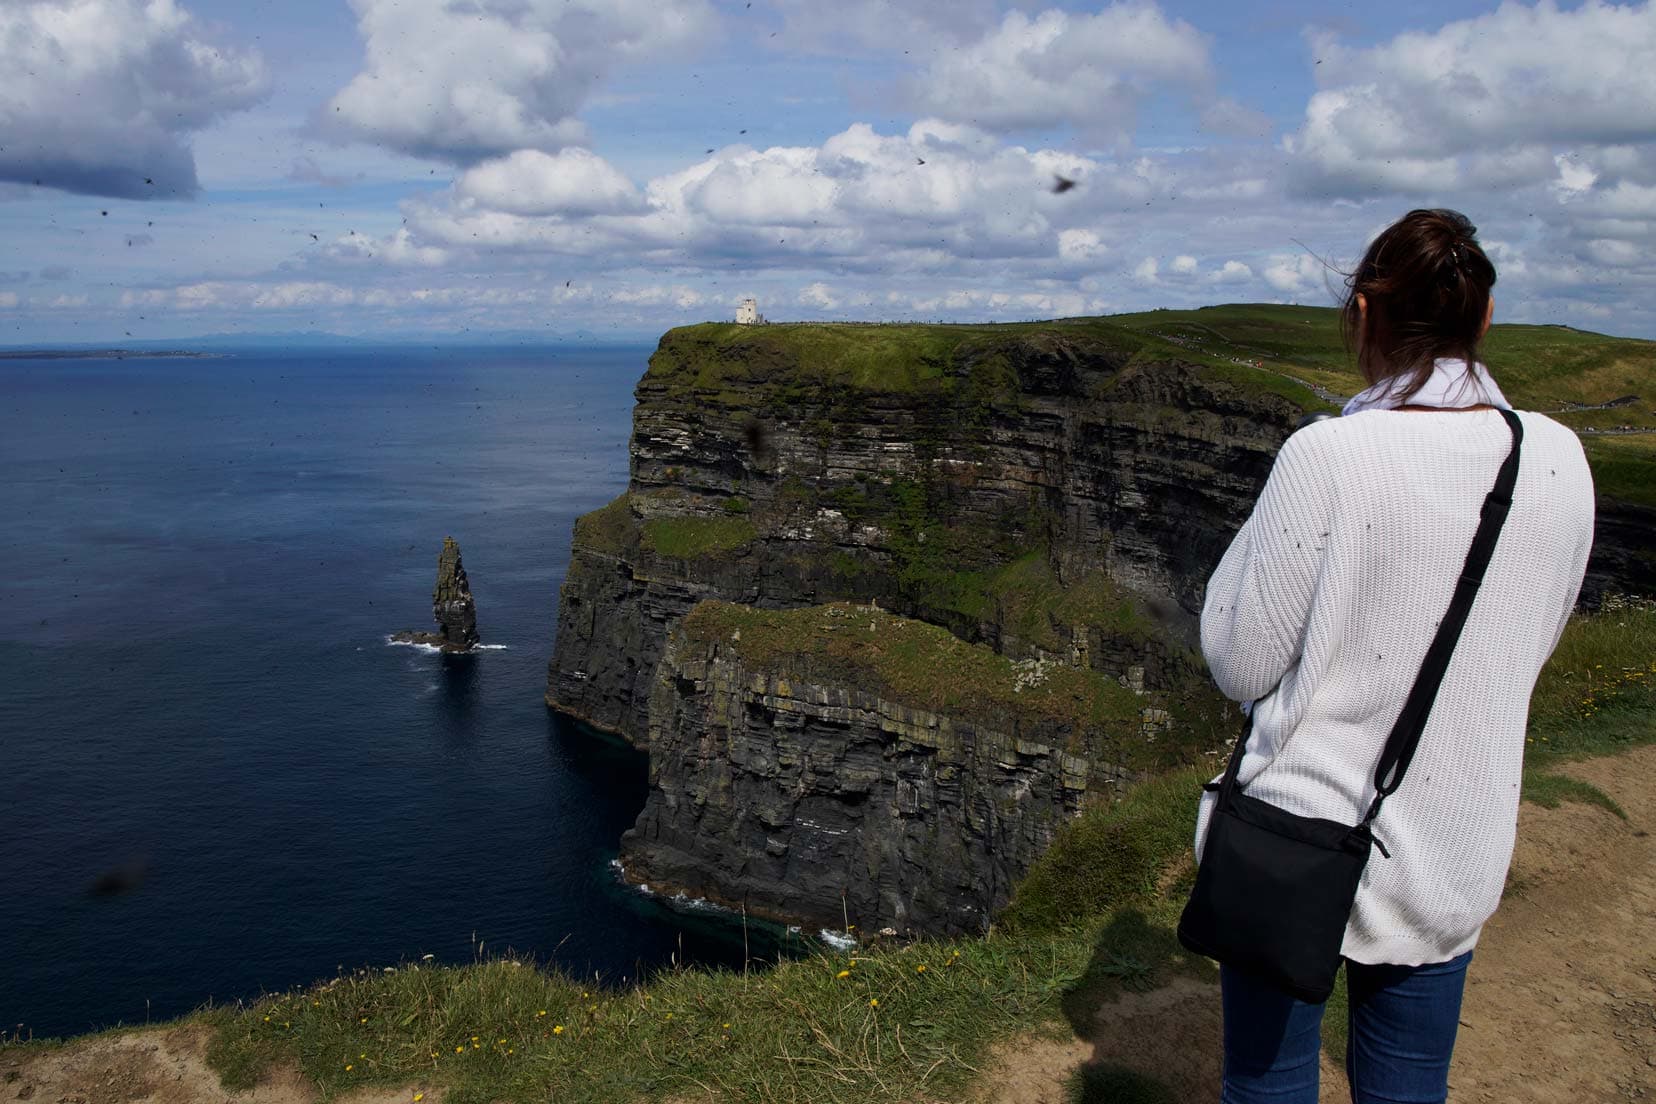 Black-bag-and-shelley in-Ireland stood by hte edge of the cliff with views of the ocean and rugged cliff faces along the coast